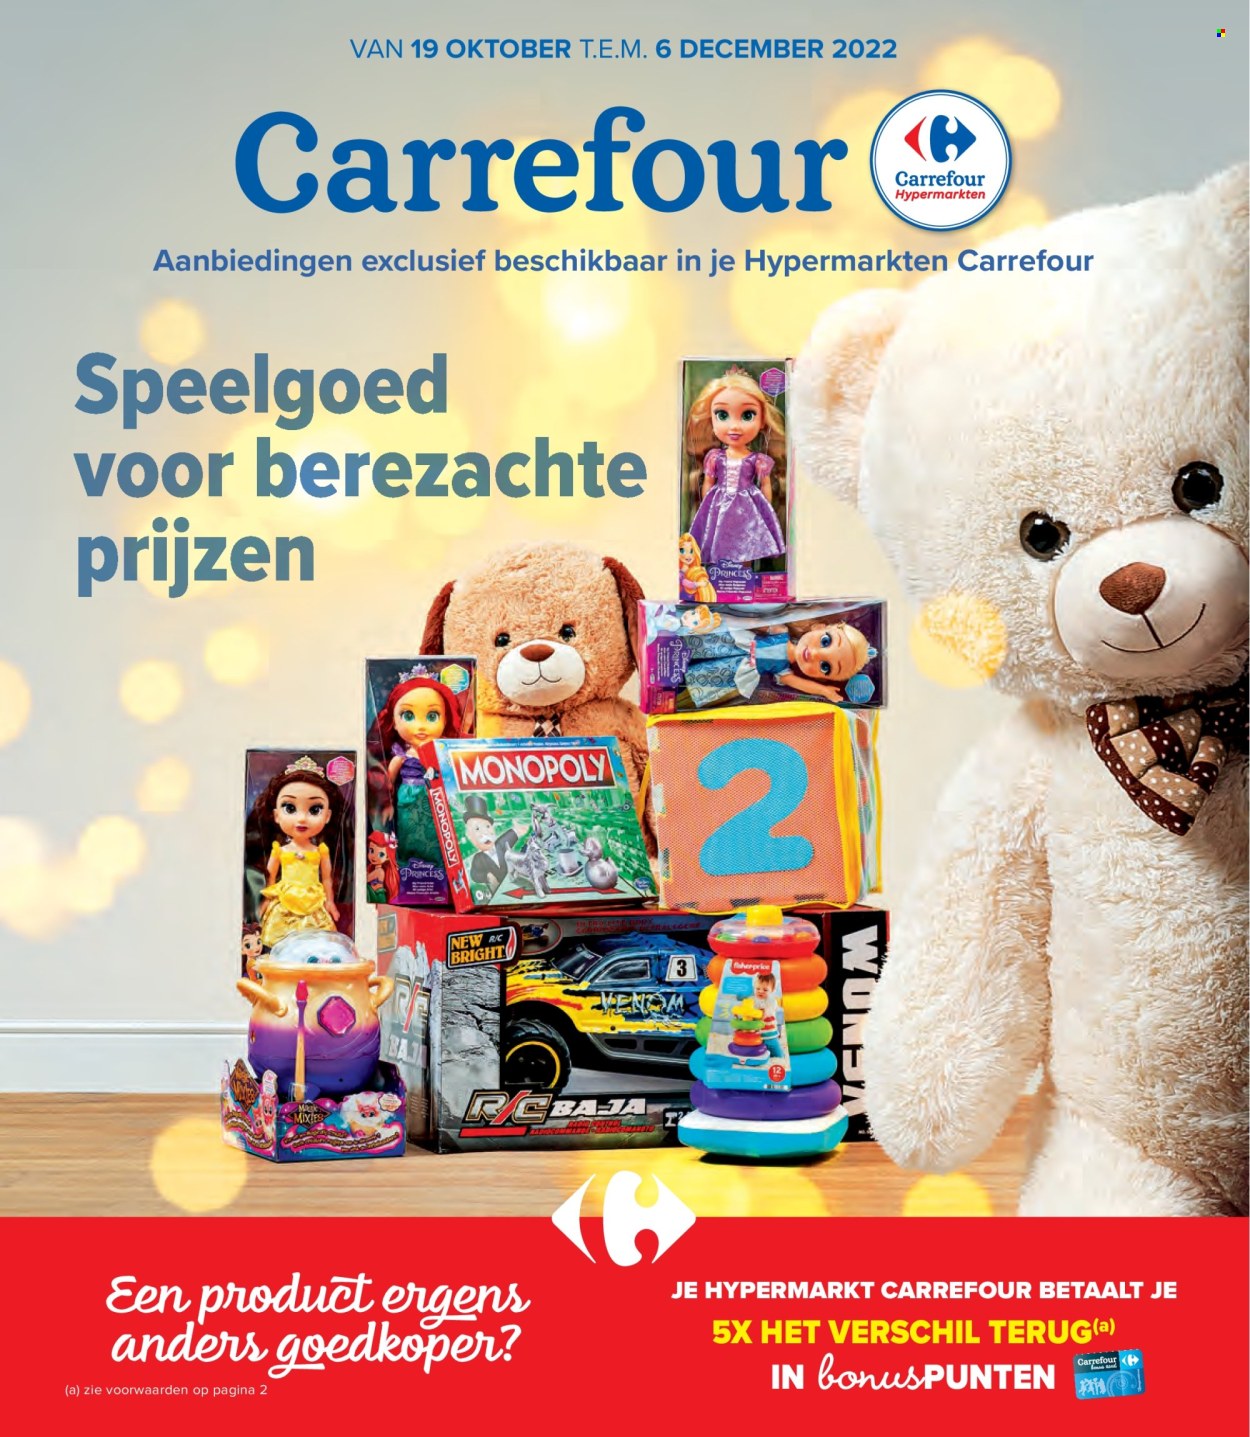 Catalogue Carrefour hypermarkt - 19.10.2022 - 6.12.2022. Page 1.